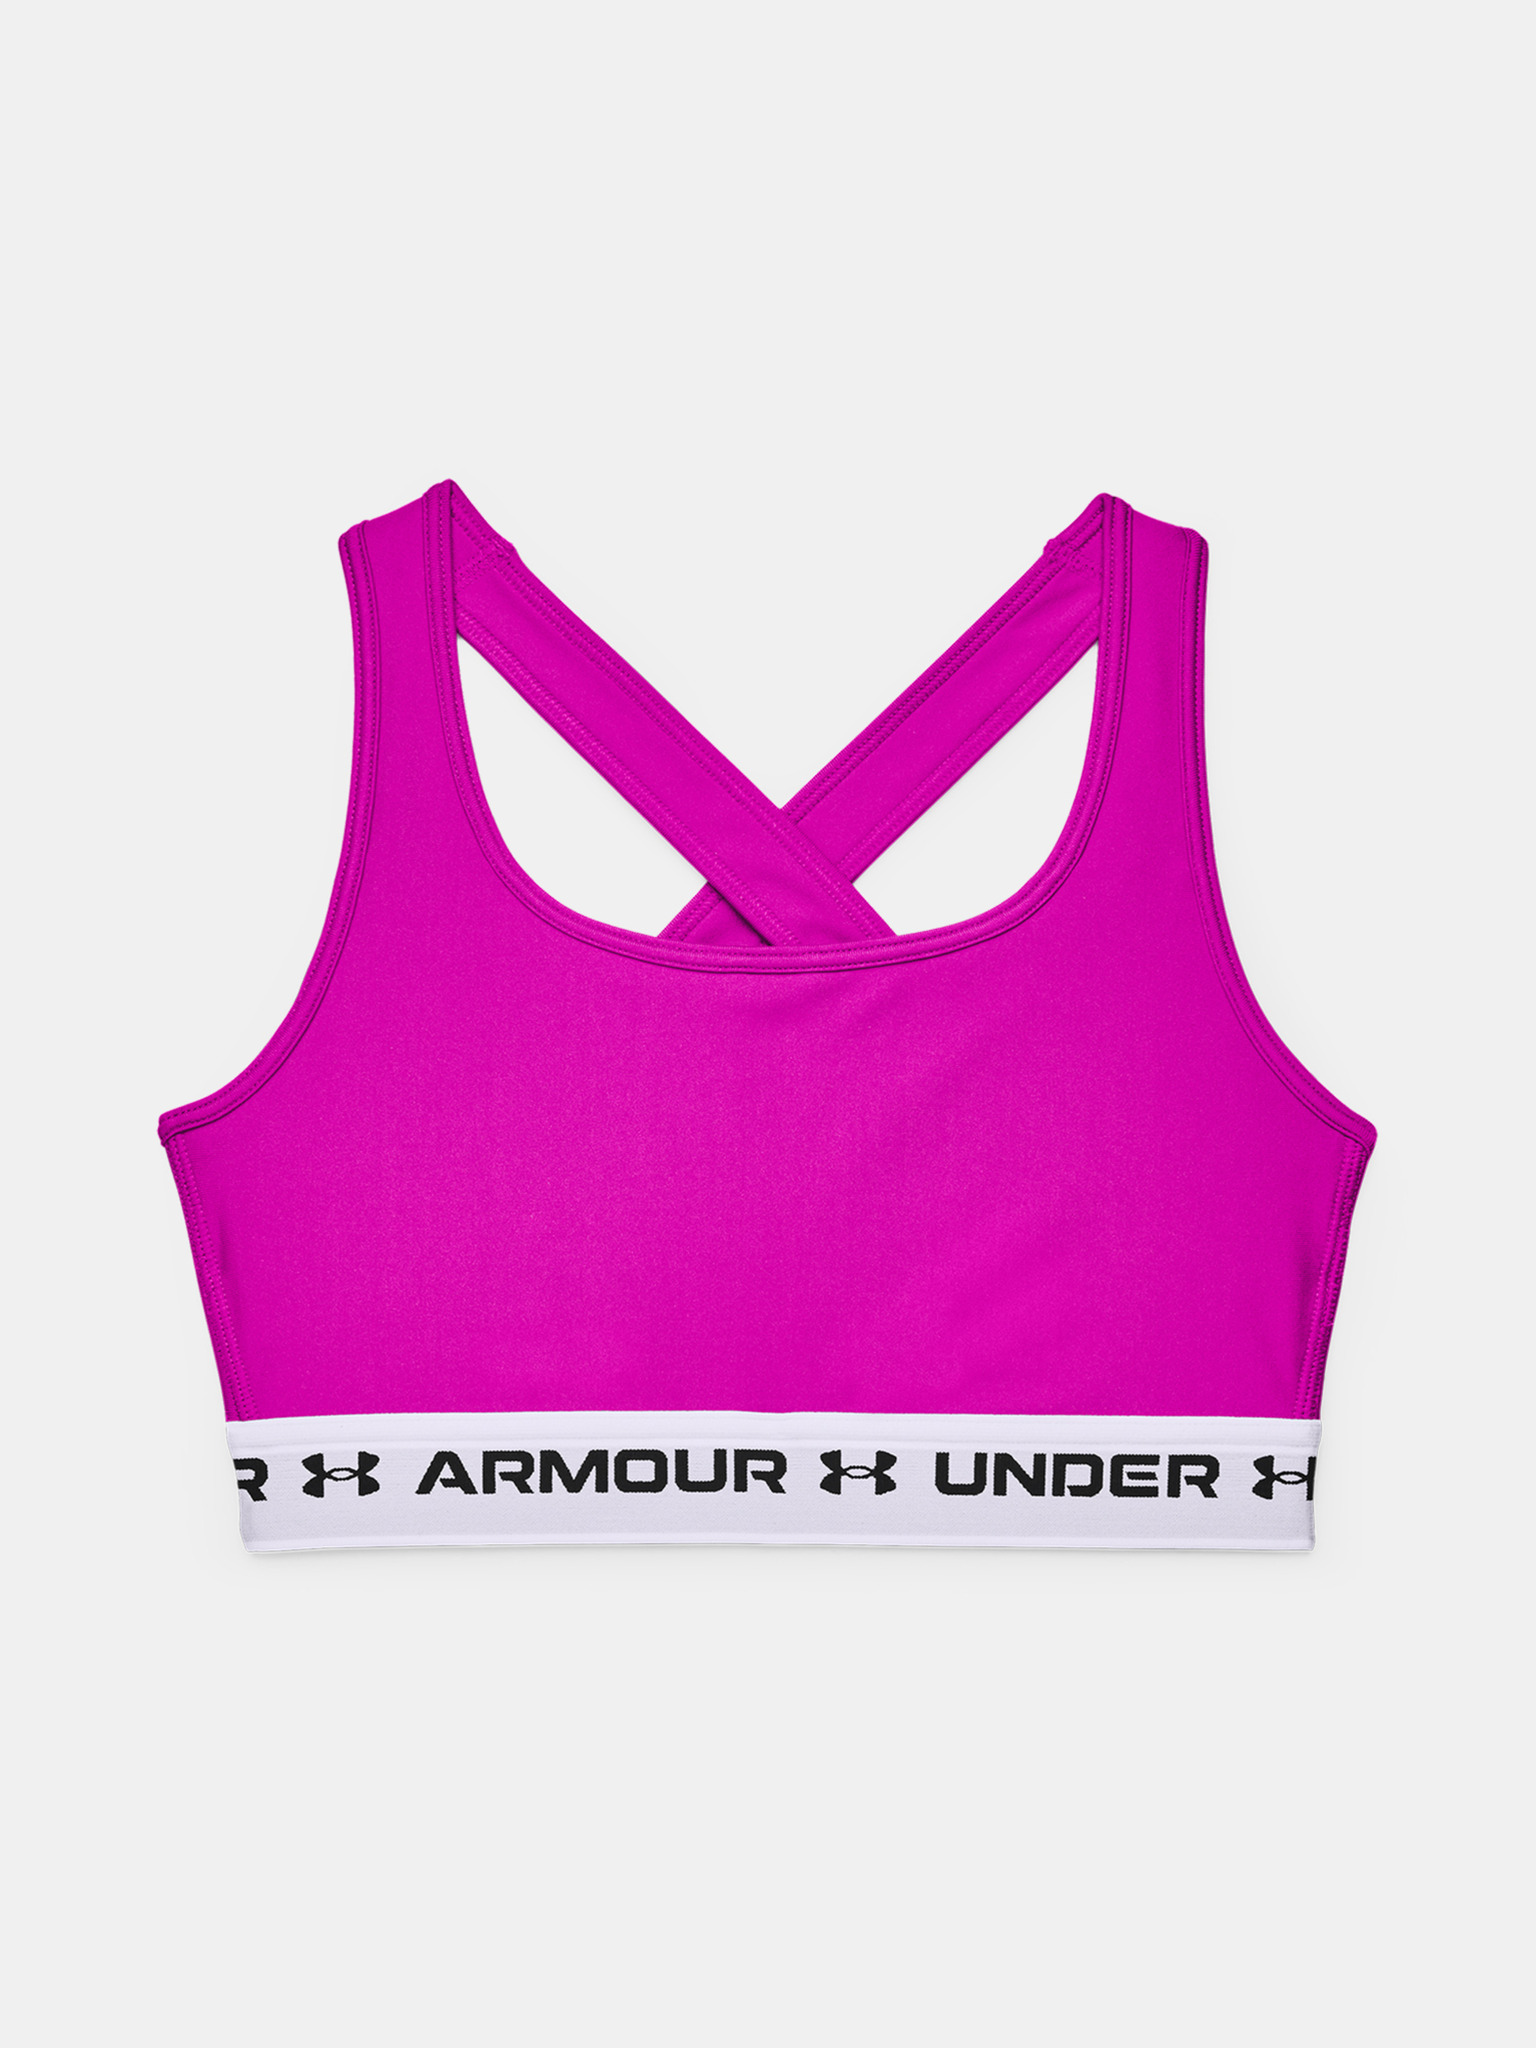 Under Armour - Women's Armour® Mid Crossback Sports Bra